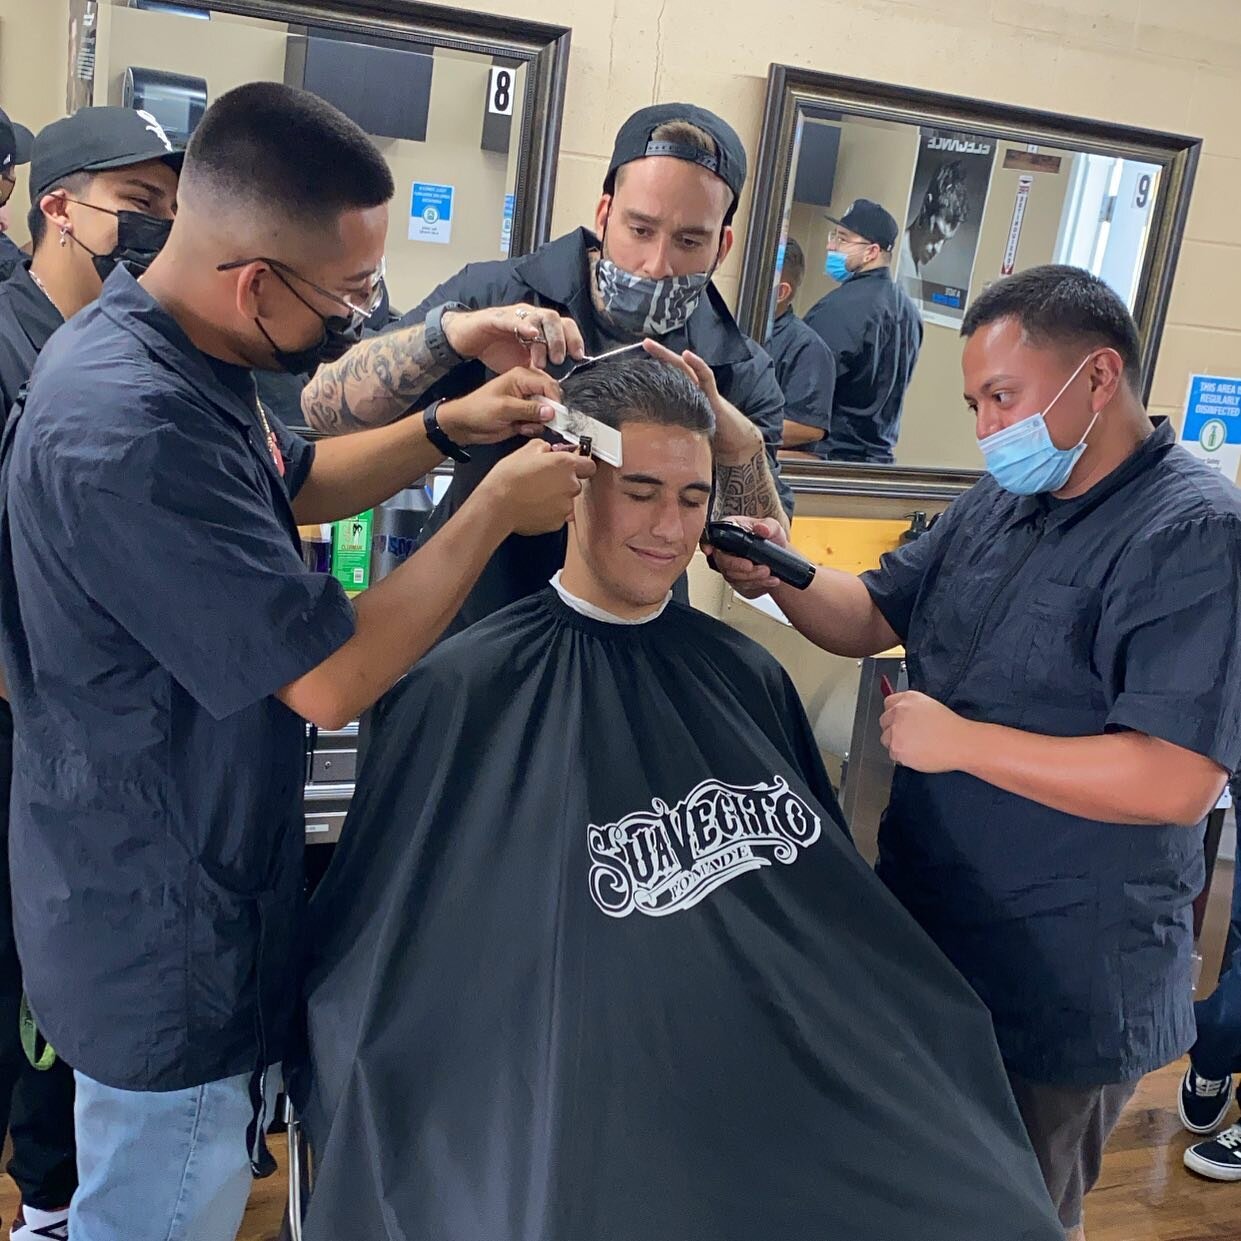 The Triple Threat!!! Students having fun at school teaming up to get the best cut possible @nandosblessed_fades @limitless.blendz @ninja.cuts @phil.urbina Keep up@the hard work fellas!! #westcoastbarbercollege #barbercollege #barberschool #oceanside 